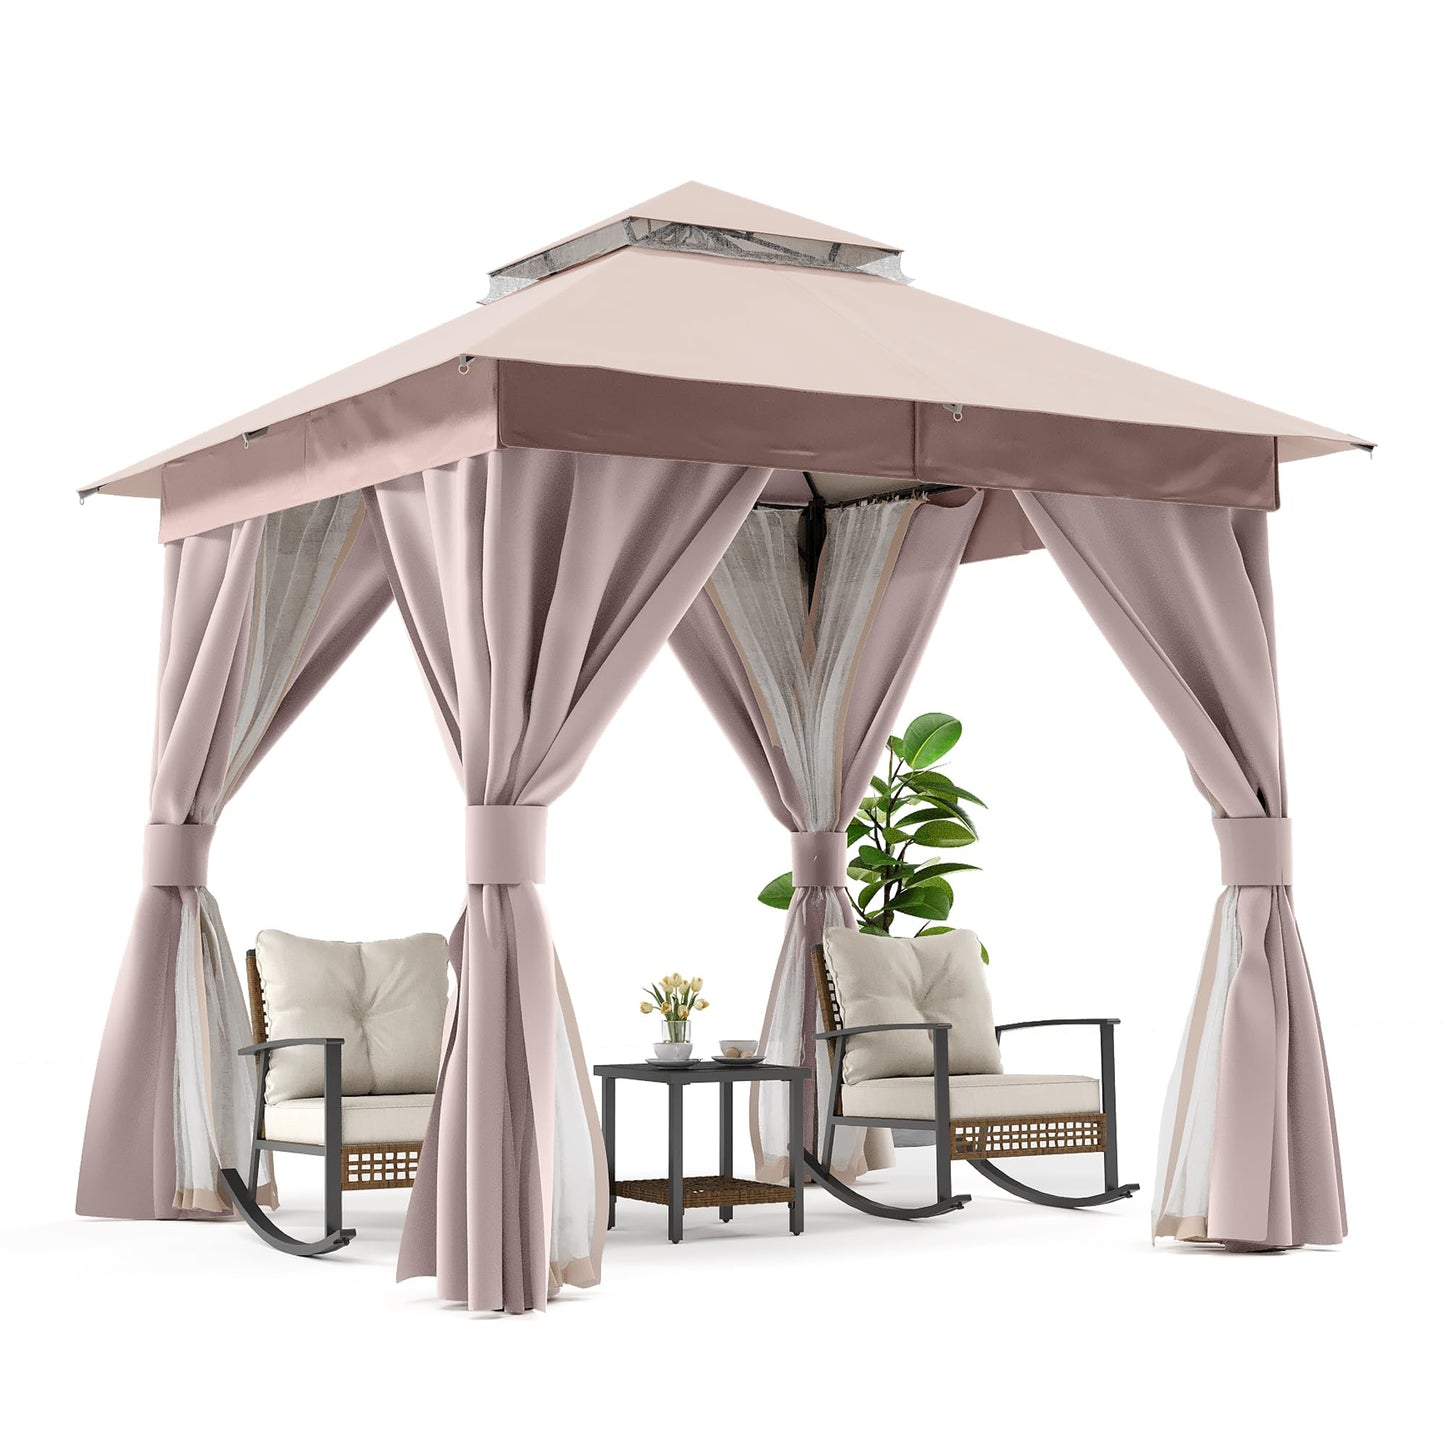 LAUSAINT HOME Outdoor Patio Gazebo 8'x8' with Expansion Bolts, Heavy Duty Gazebos Shelter Party Tent with Double Roofs, Mosquito Nettings and Privacy Screens for Backyard, Garden, Lawn, Khaki